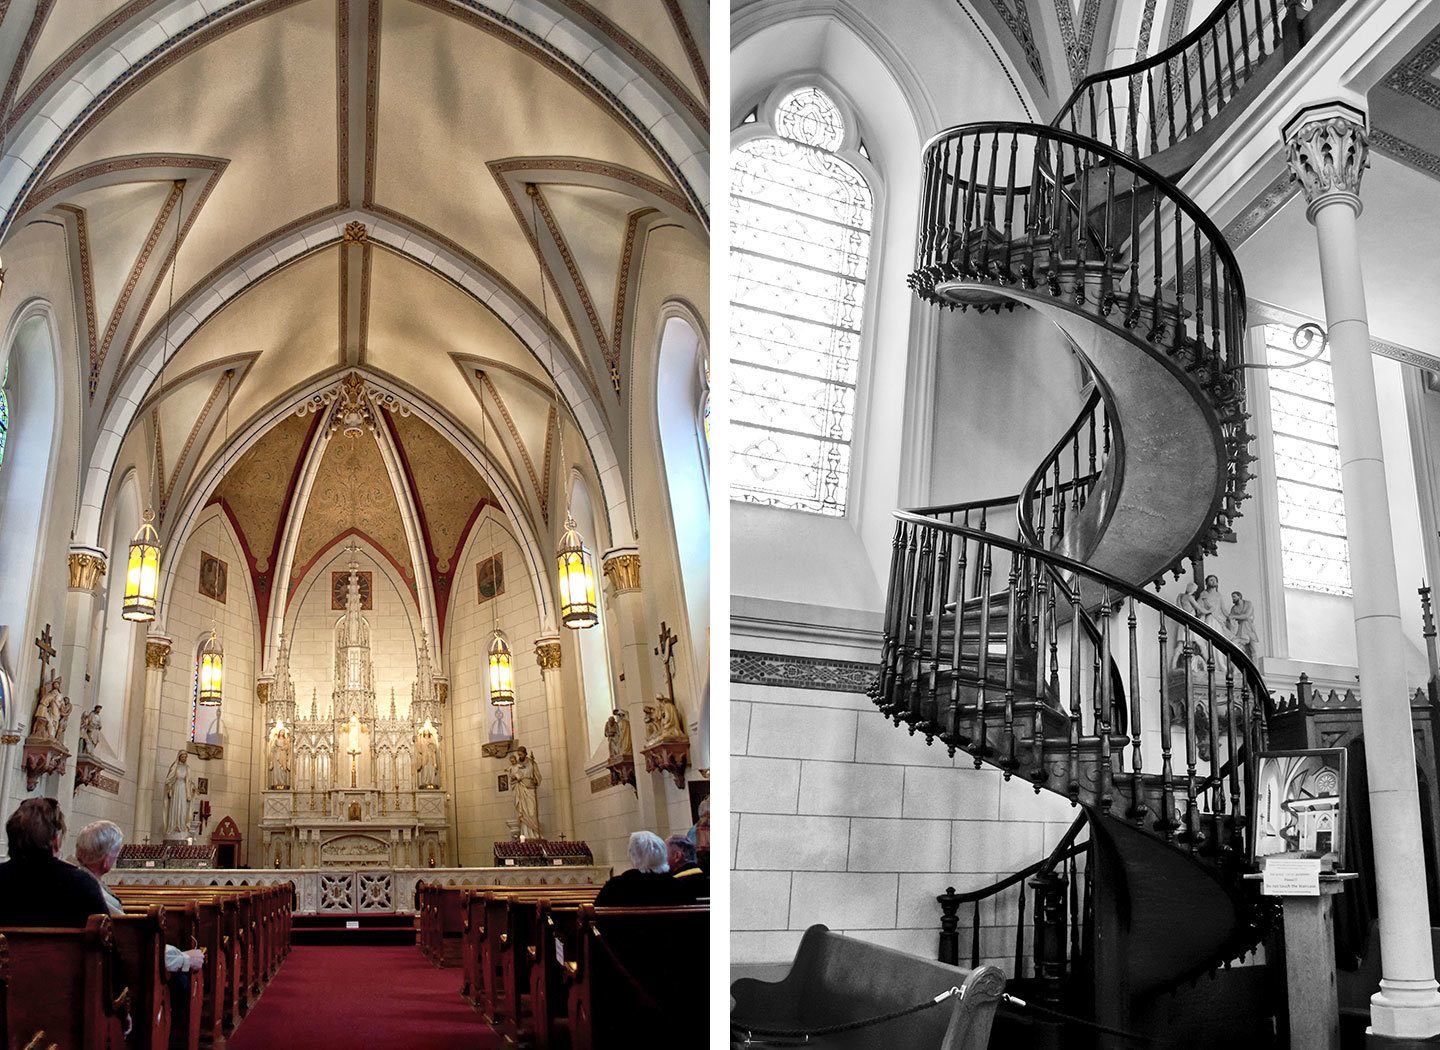 Inside the Loretta Chapel and the miraculous staircase, Santa Fe